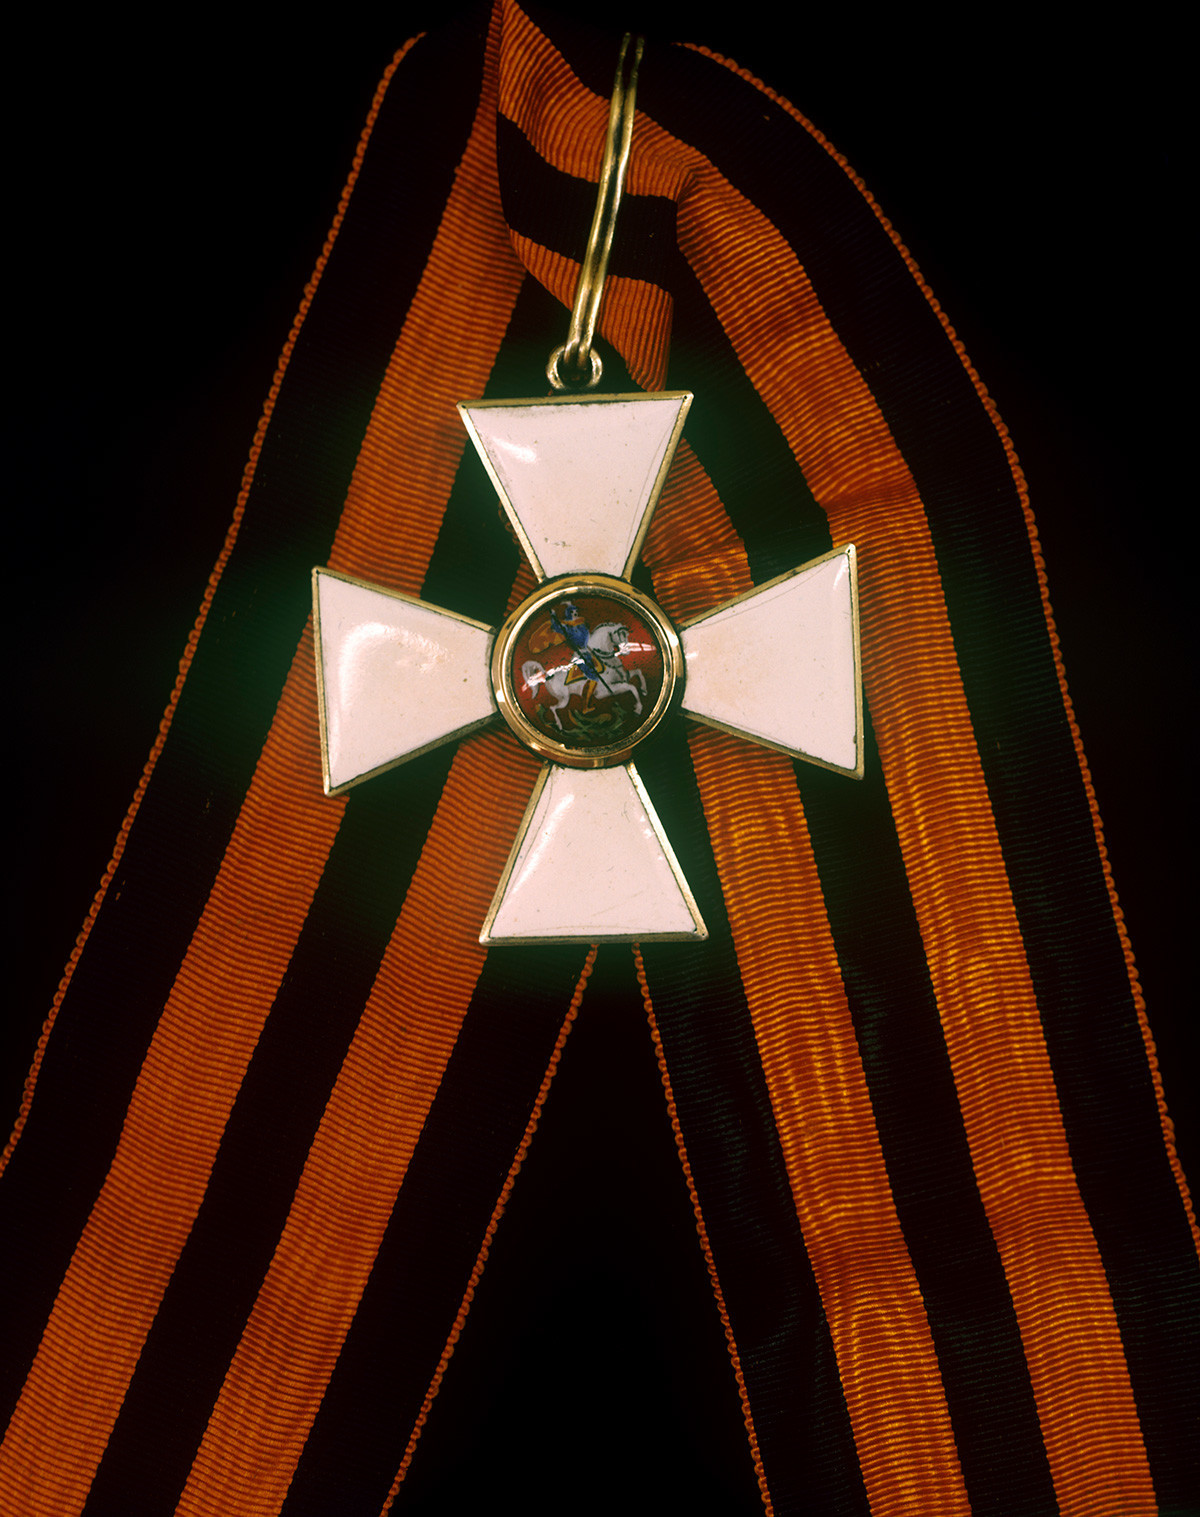 The Cross (Badge) of the Order of St. George, 1st Class

